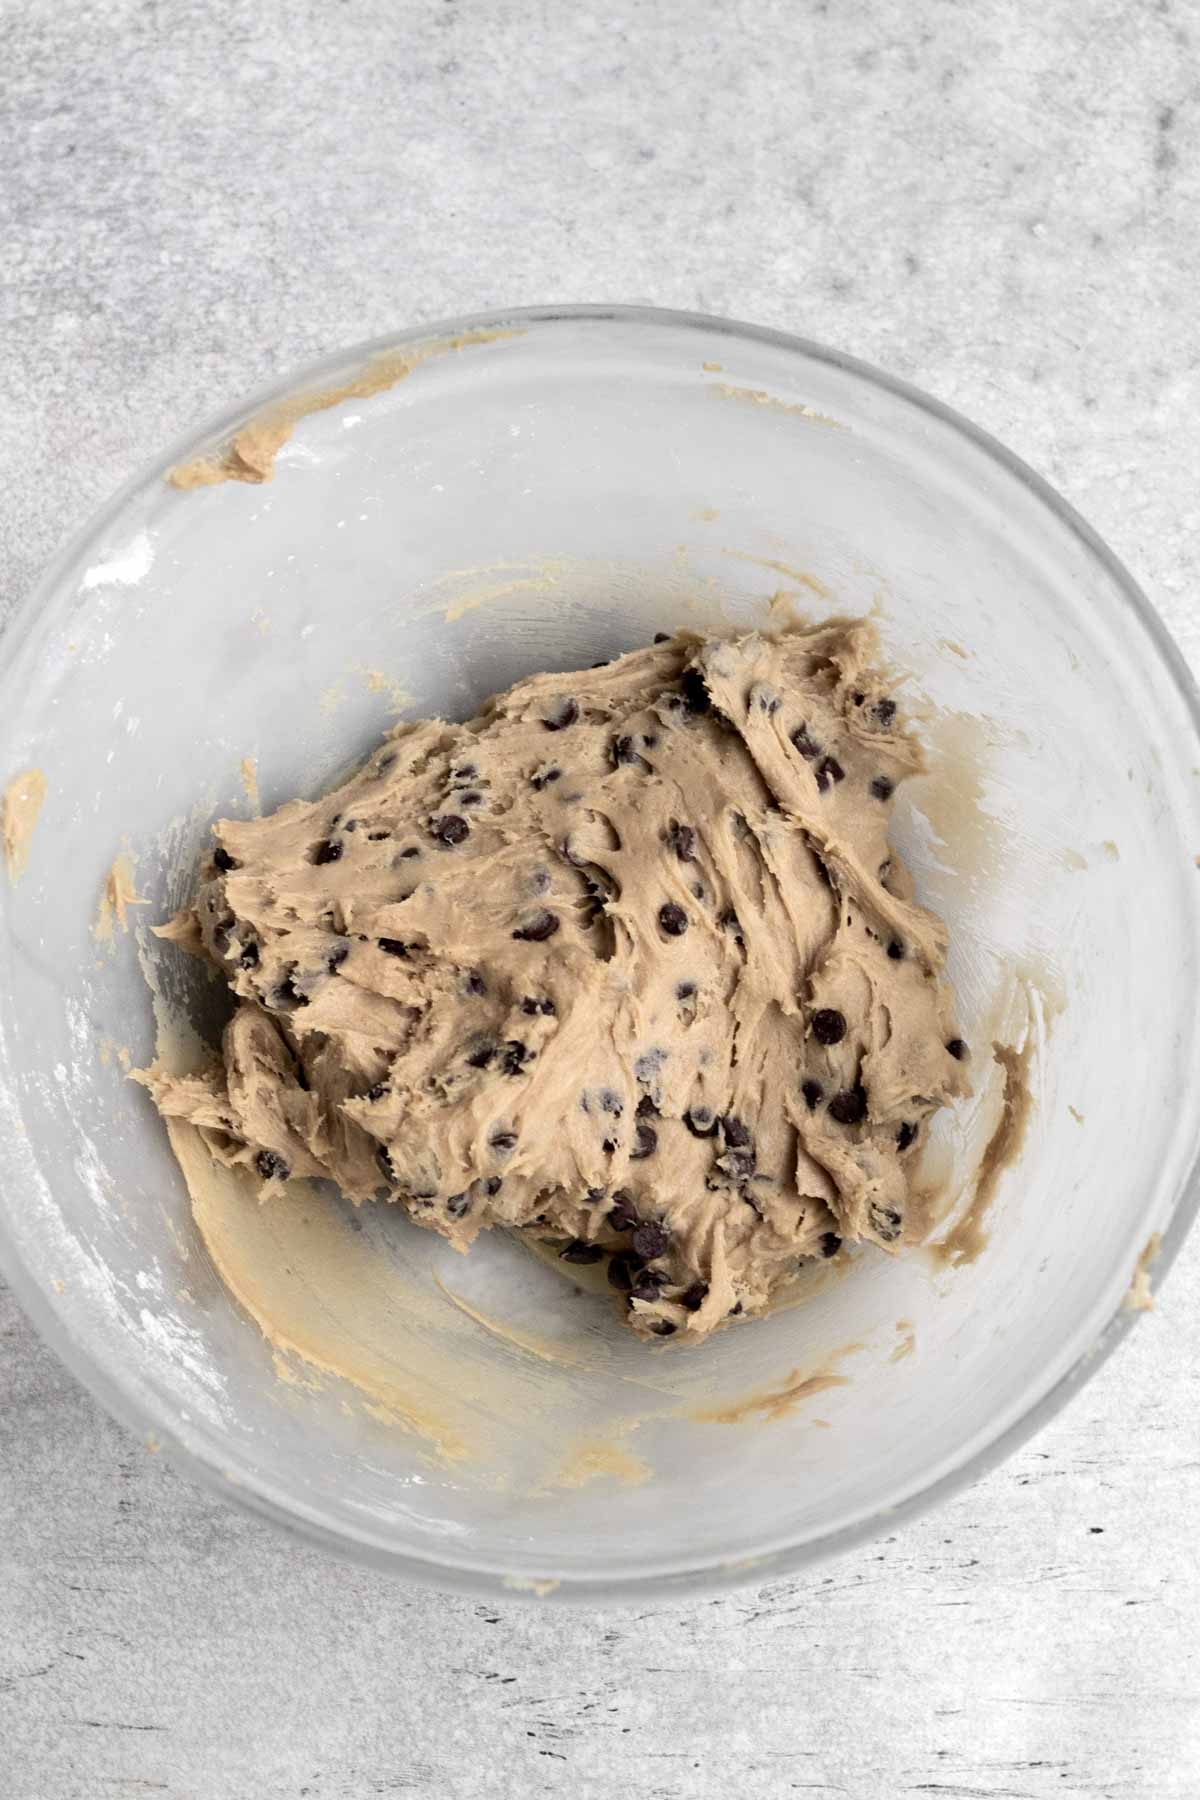 A glass bowl with chocolate chip cookie dough batter.